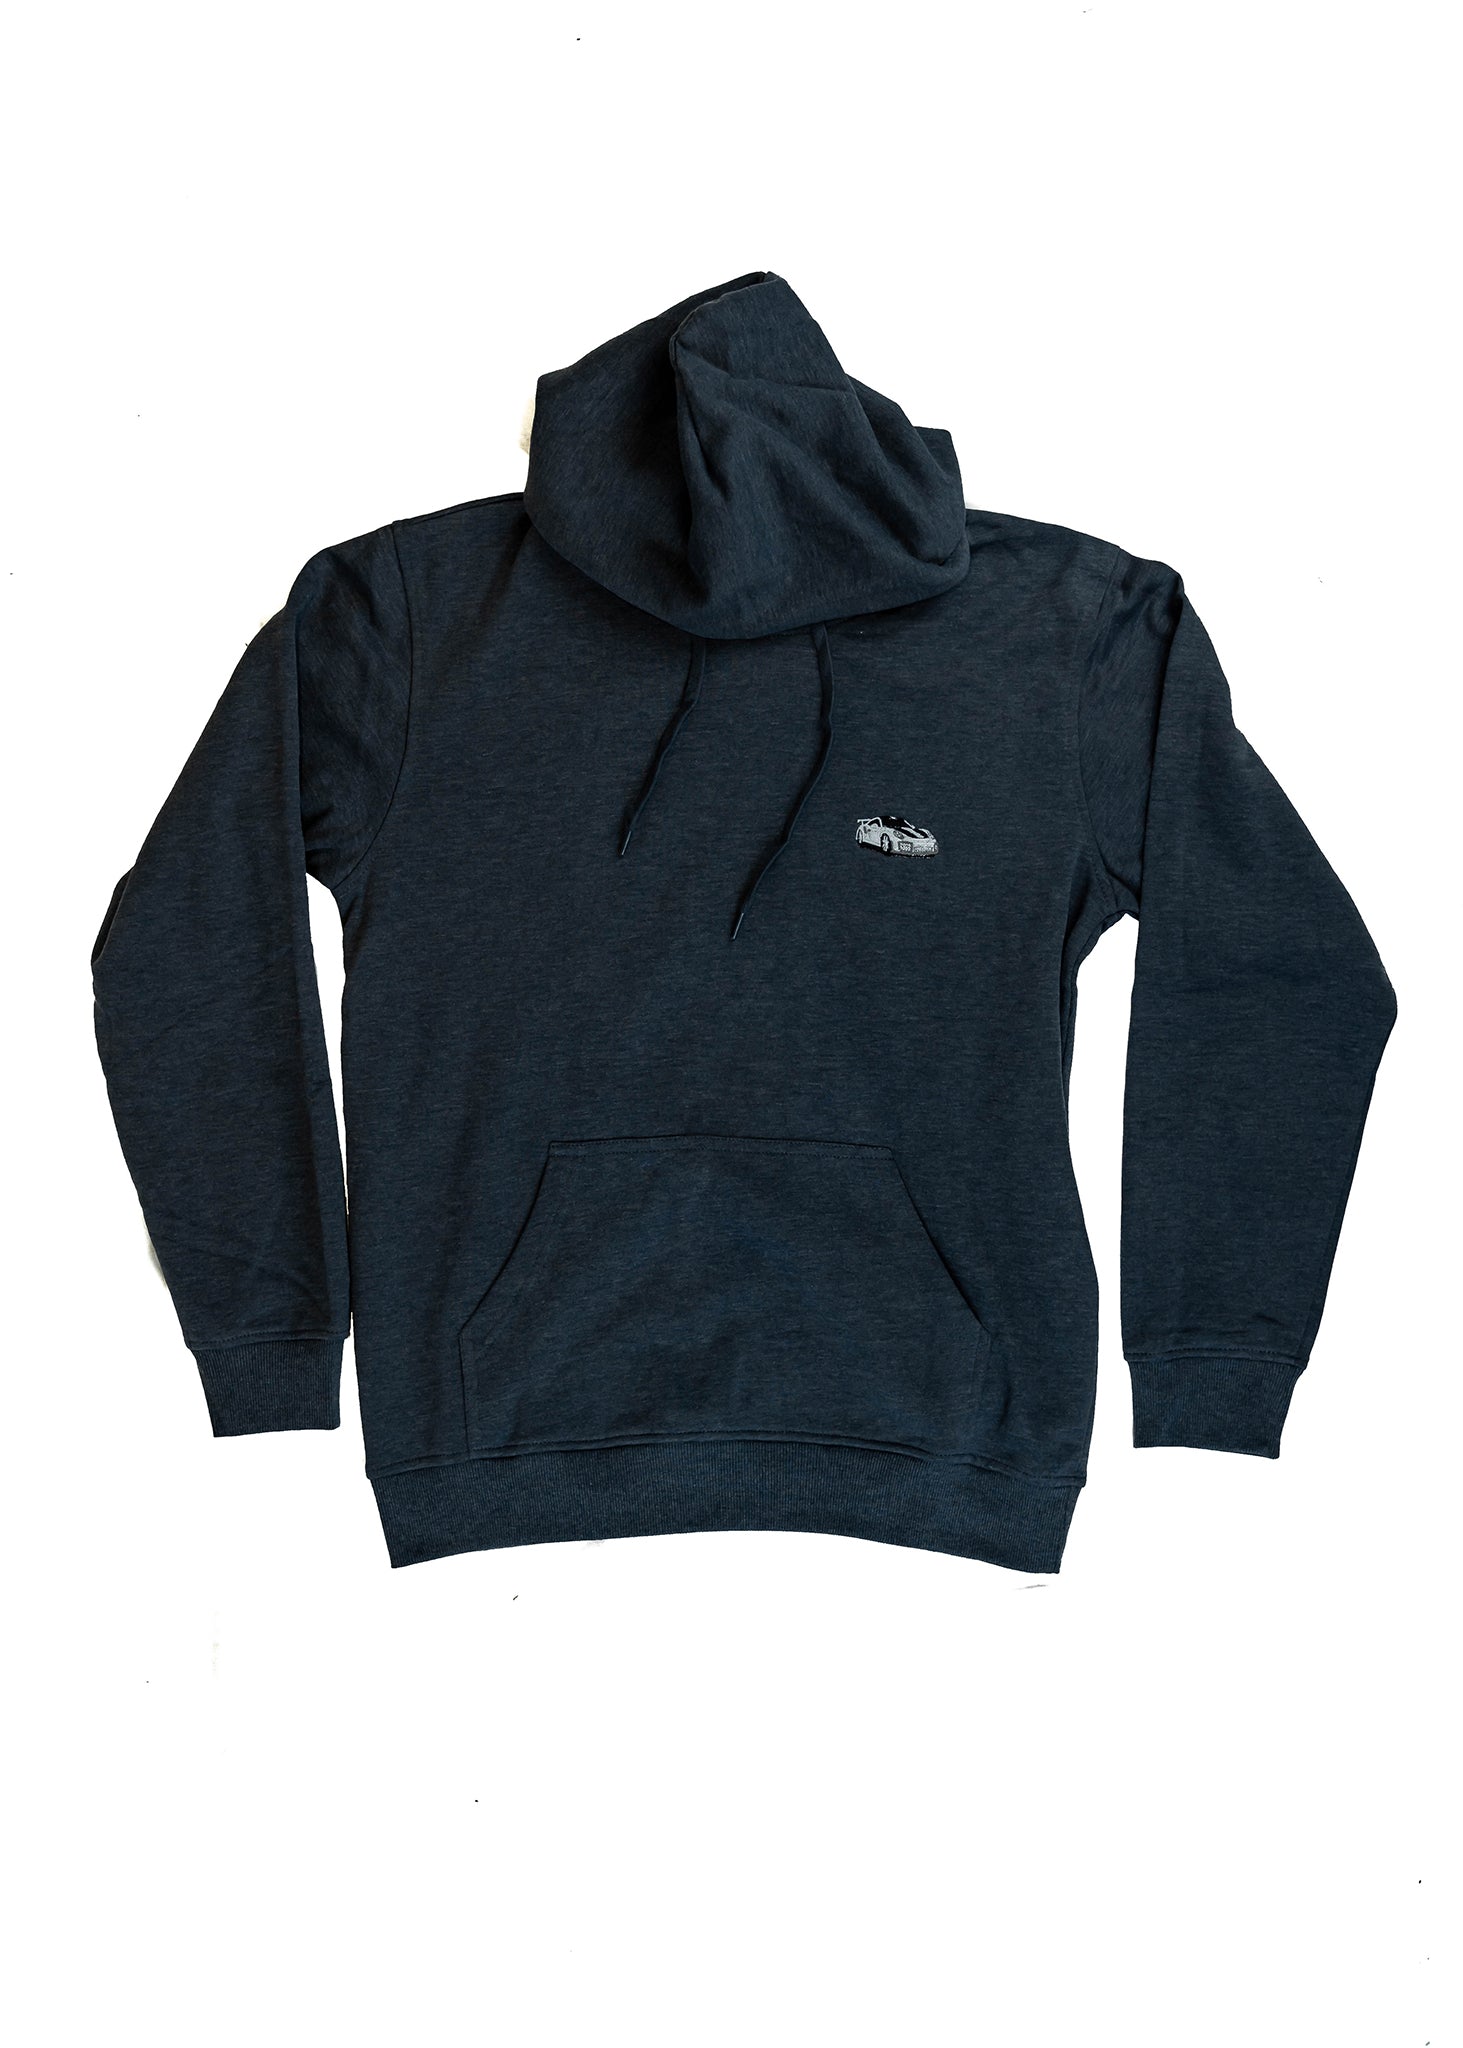 A navy blue unisex hoodie for men and women. Full size front view of the dark blue sweater with an embroidered white, silver, carbon fiber GT2 RS on the left chest. Fabric composition is cotton, polyester, and rayon. The material is very soft, stretchy, and non-transparent. The style of this hoodie is long sleeve, crewneck with a hood, hooded, with embroidery on the left chest.